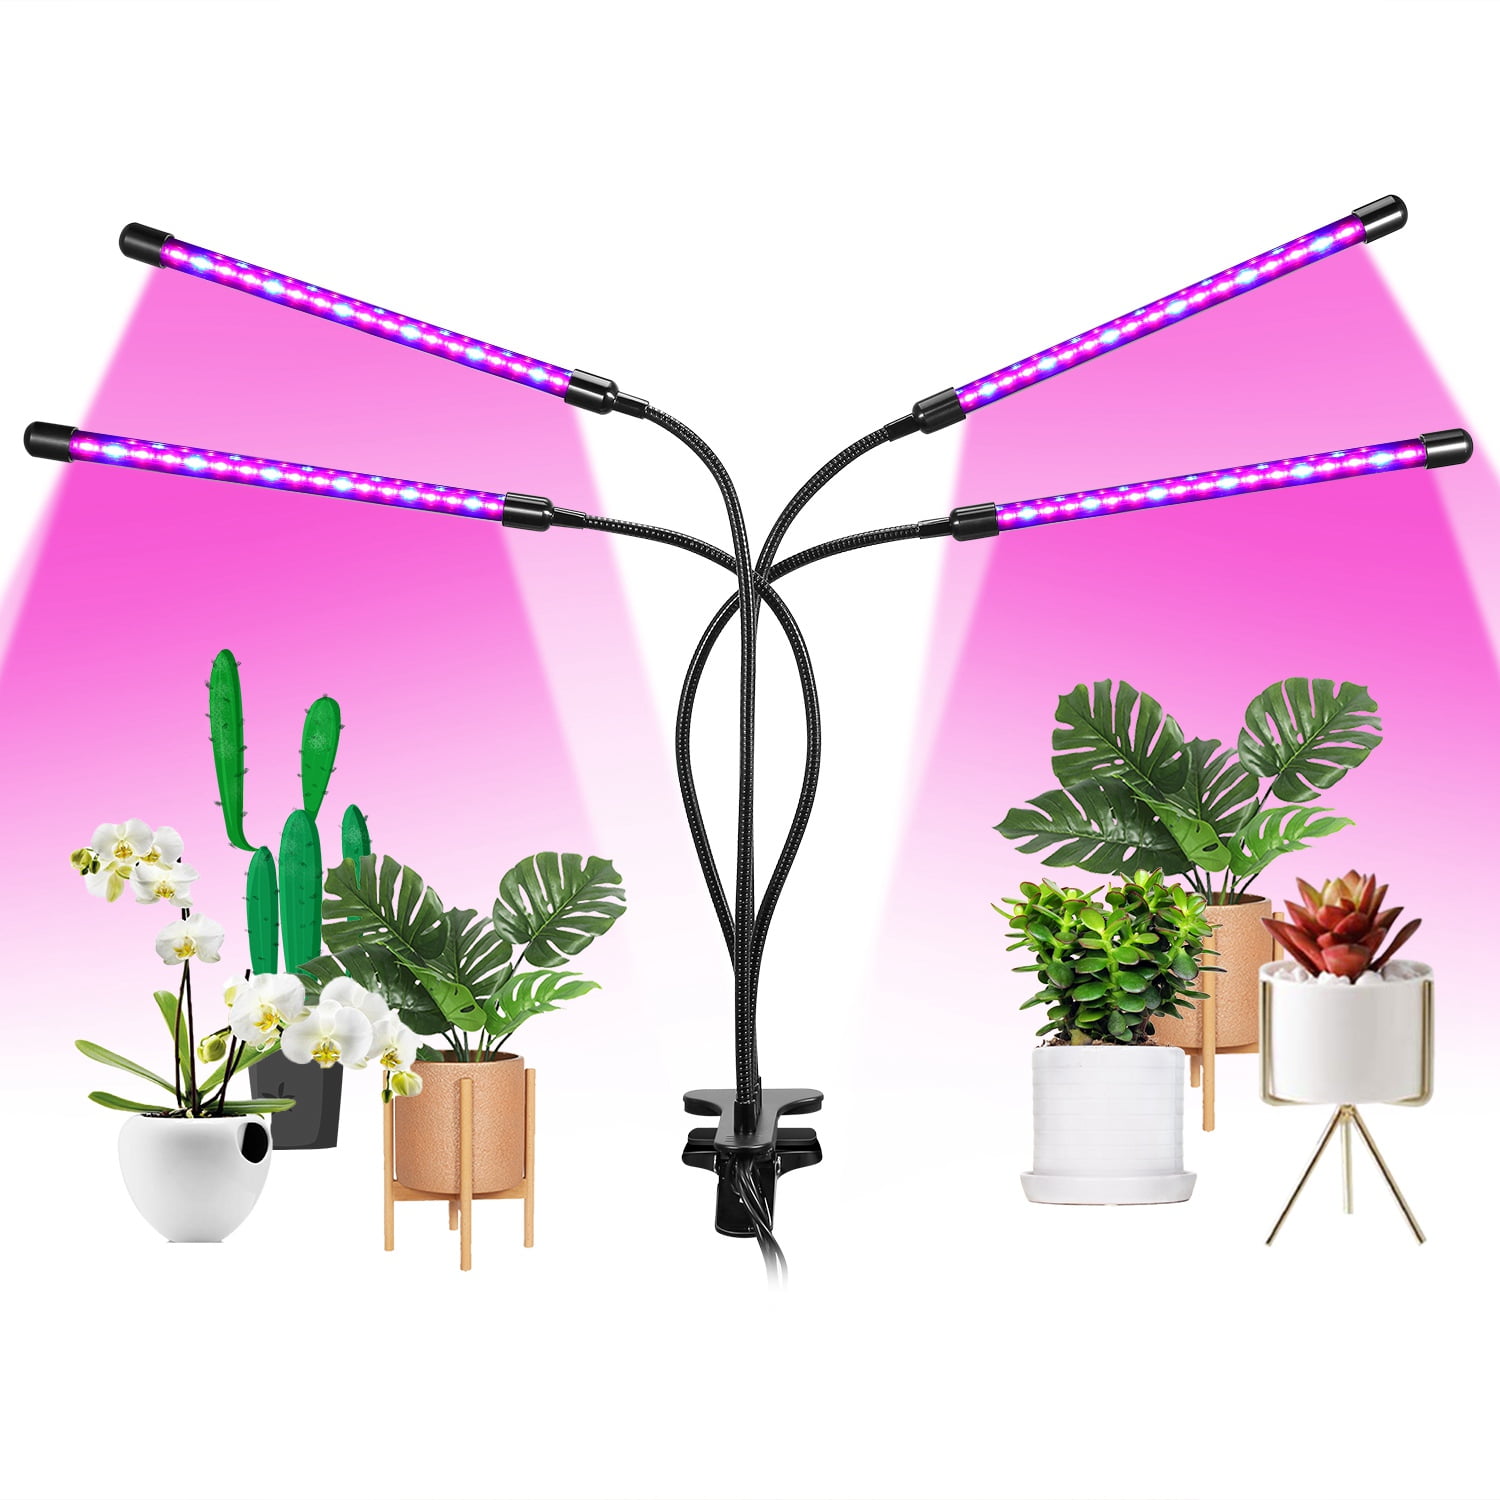 Details about   4 Head 96 LED Grow Light Plant Light Panel Growing Plant Flower Indoor Lamp US 